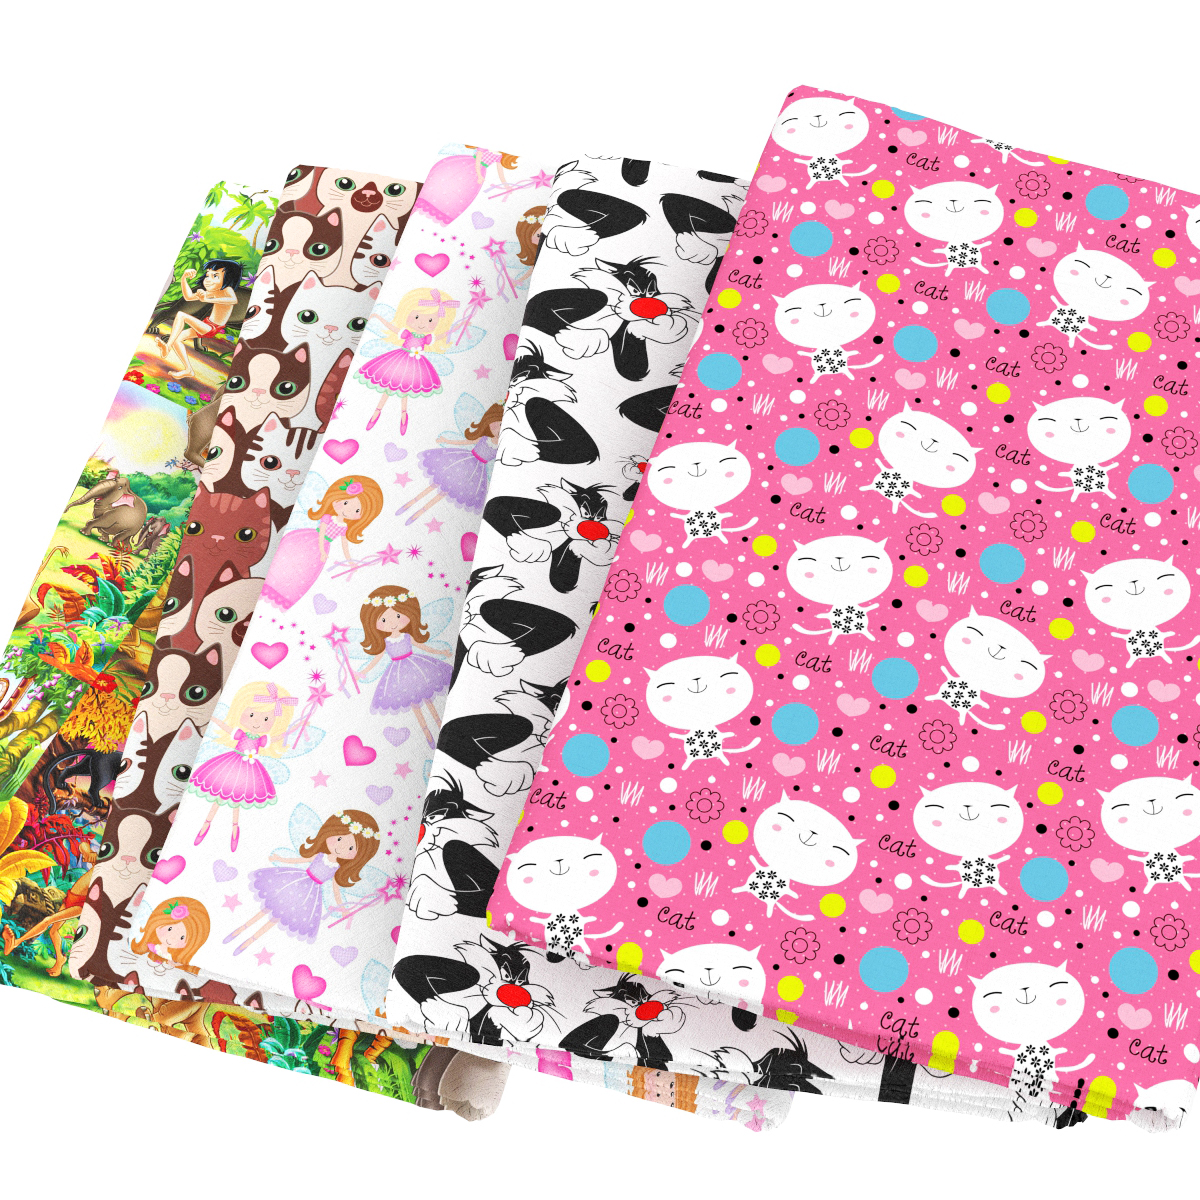 50*145cm Cat Patchwork Printed 100% Cotton Fabric for Tissue Kids Home Textile for Sewing Quilting Fat Quarters,c4192